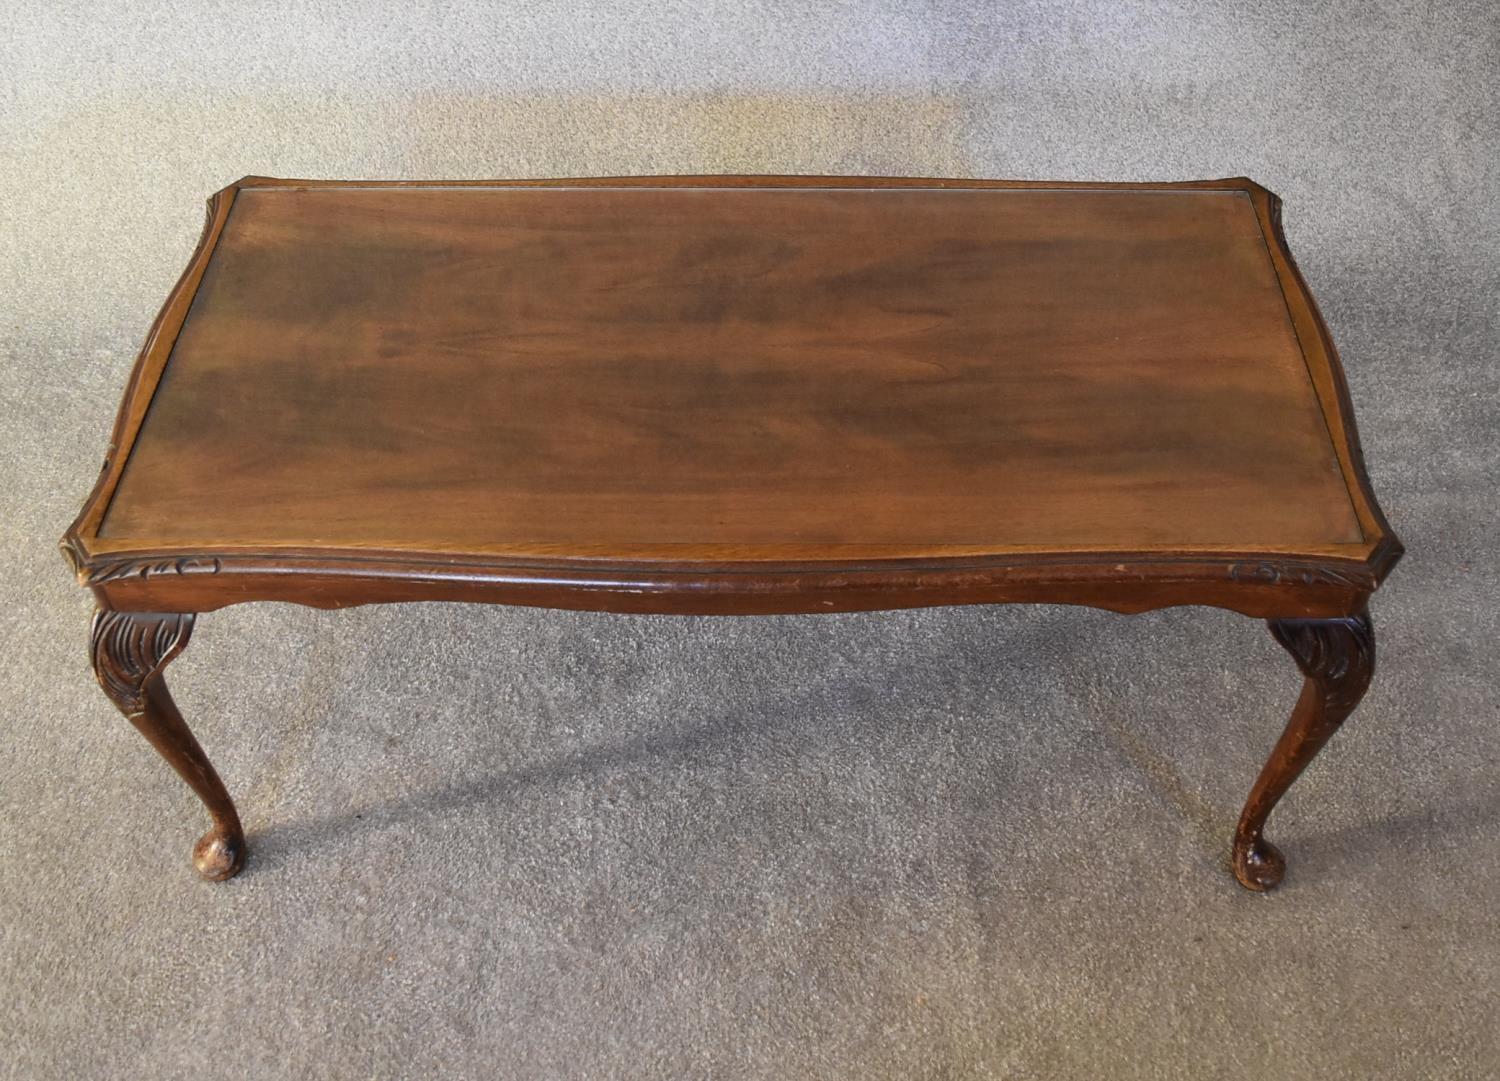 A mahogany Georgian style coffee table with a glass top. H.40 x 97cm - Image 2 of 3